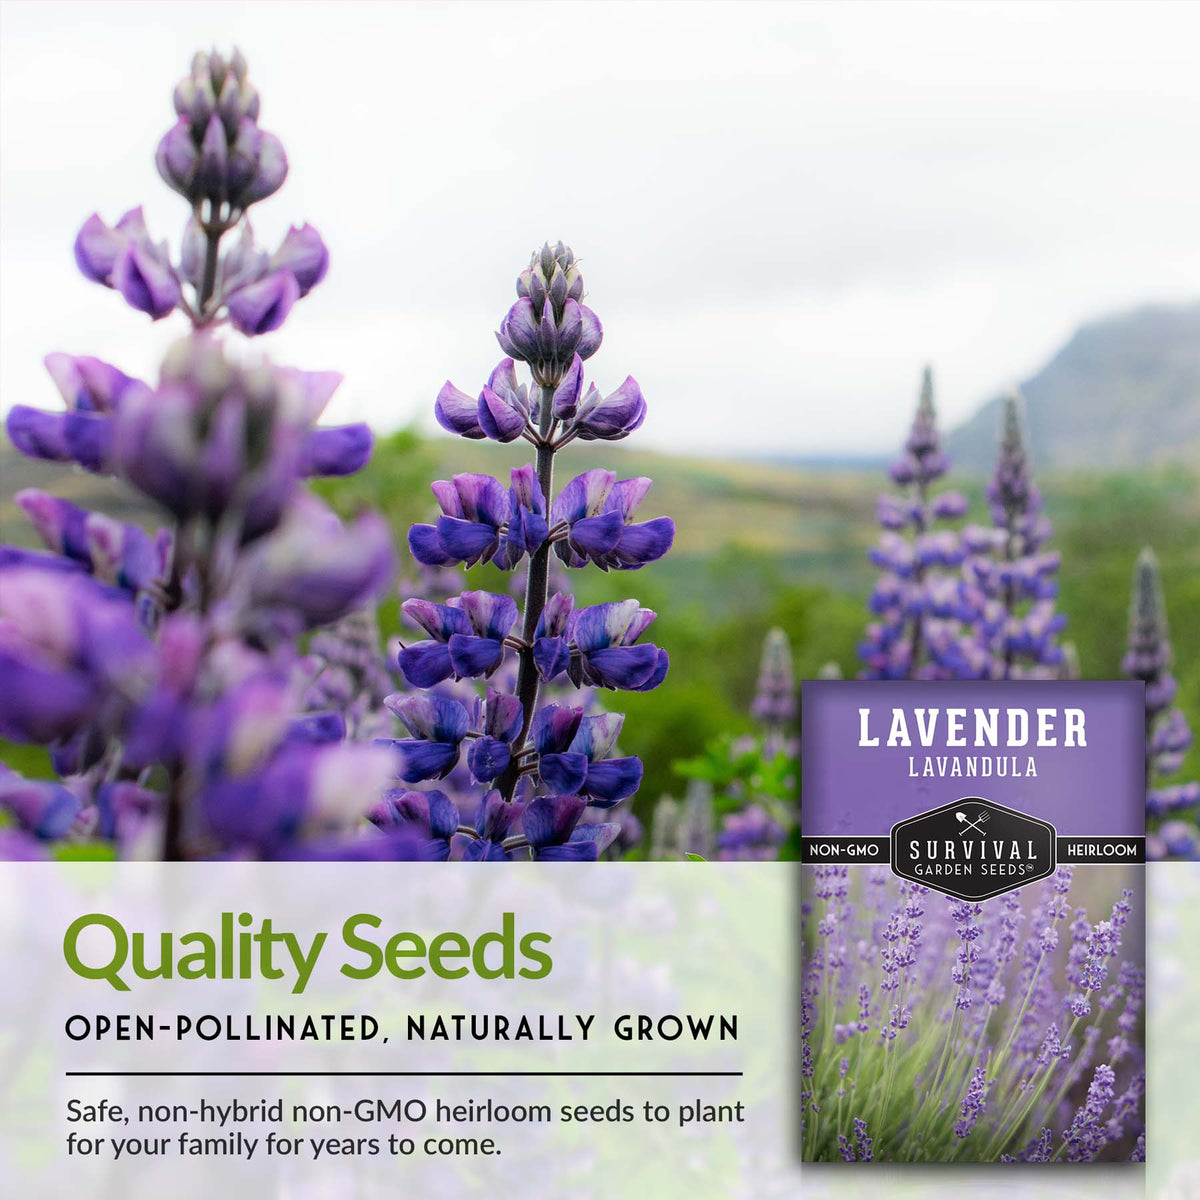 survival garden seeds are high quality